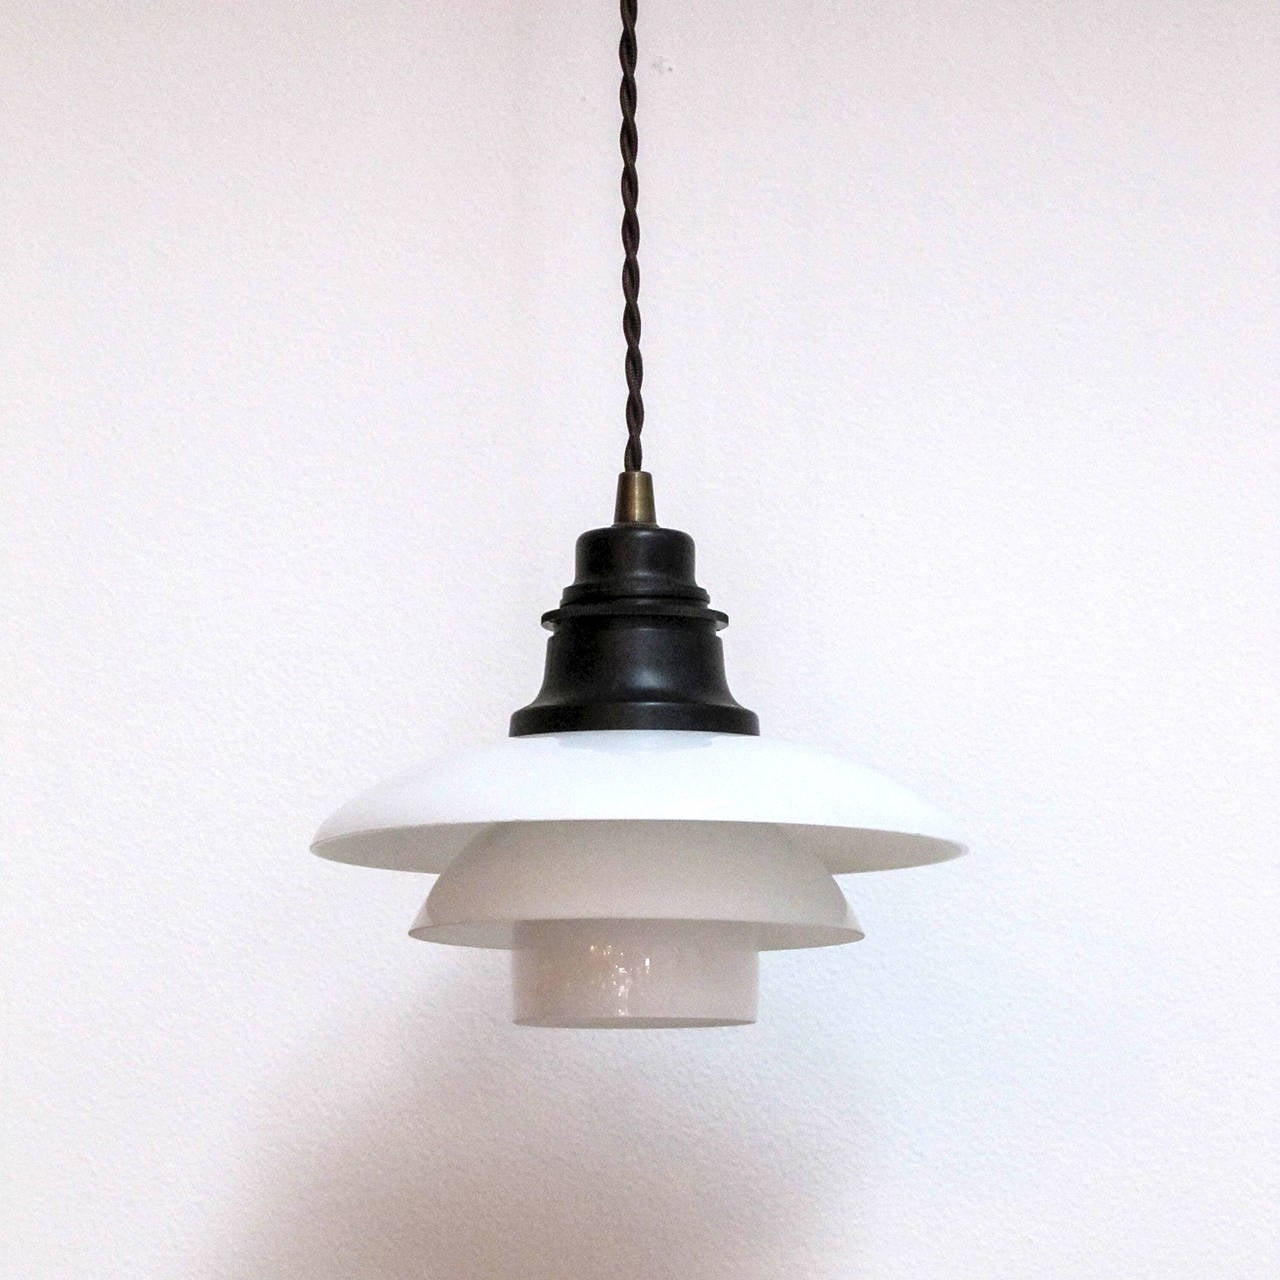 Outstanding PH-2 pendant lights by Poul Henningsen for Louis Poulsen.
Opal glass on bakelite sockets, signed or stamped at each socket, patented PH-2.